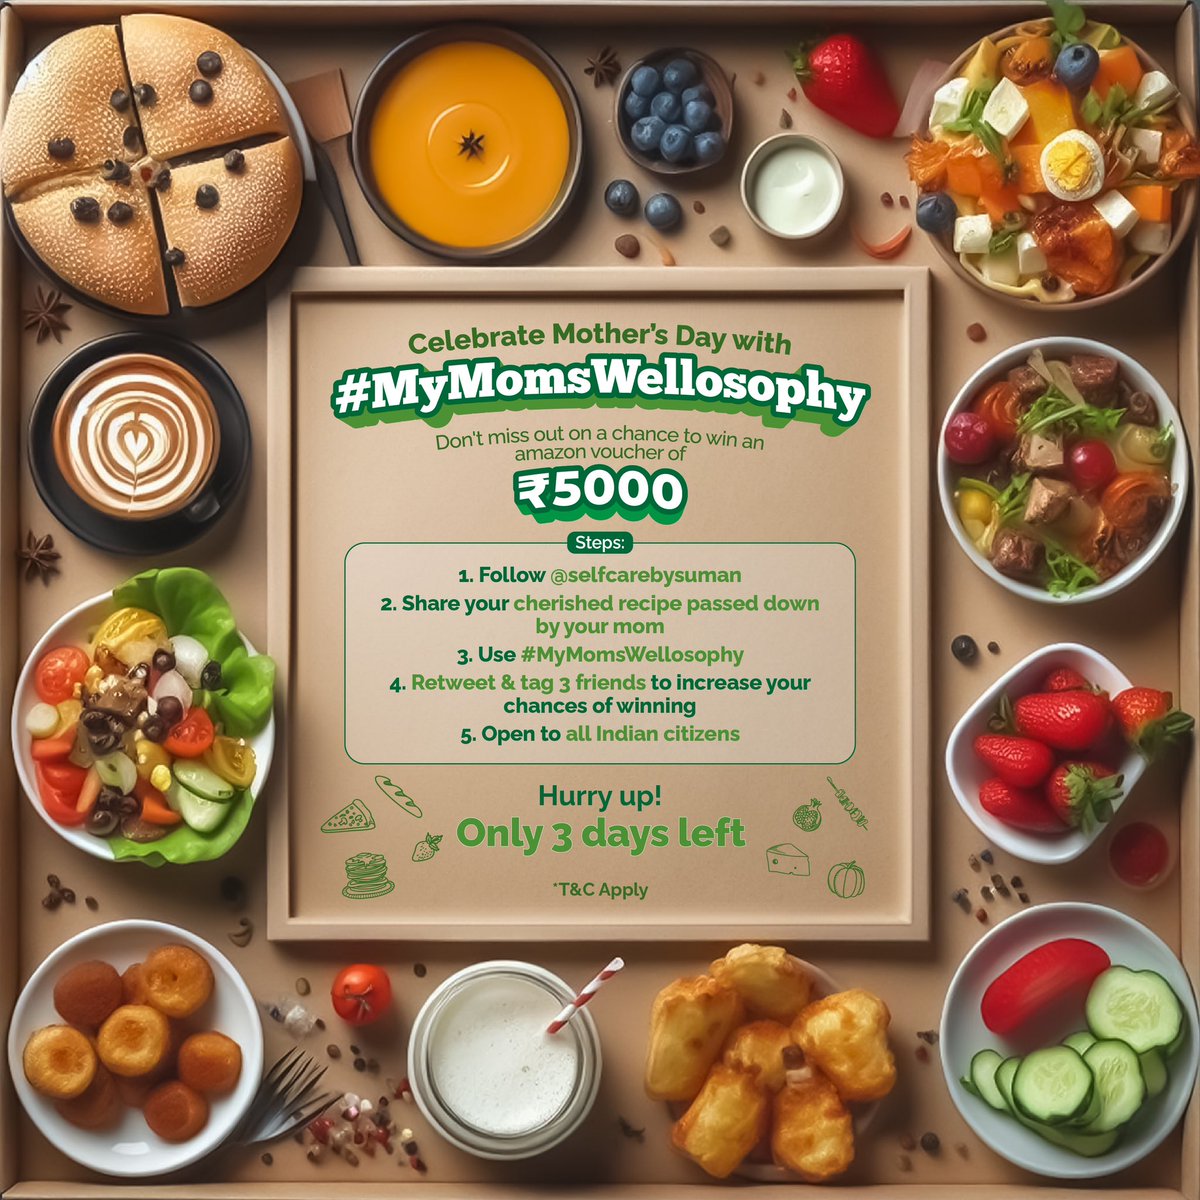 📣 Reminder: Send me your lip-smacking family recipe! 😀 Only 3 days left to participate in the #MyMomsWellosophy #contest and stand a chance to win an Amazon voucher worth ₹ 5000! ✨ Send entries via comment by May 8th. 😊 *T&C apply: shorturl.at/pqHZ7